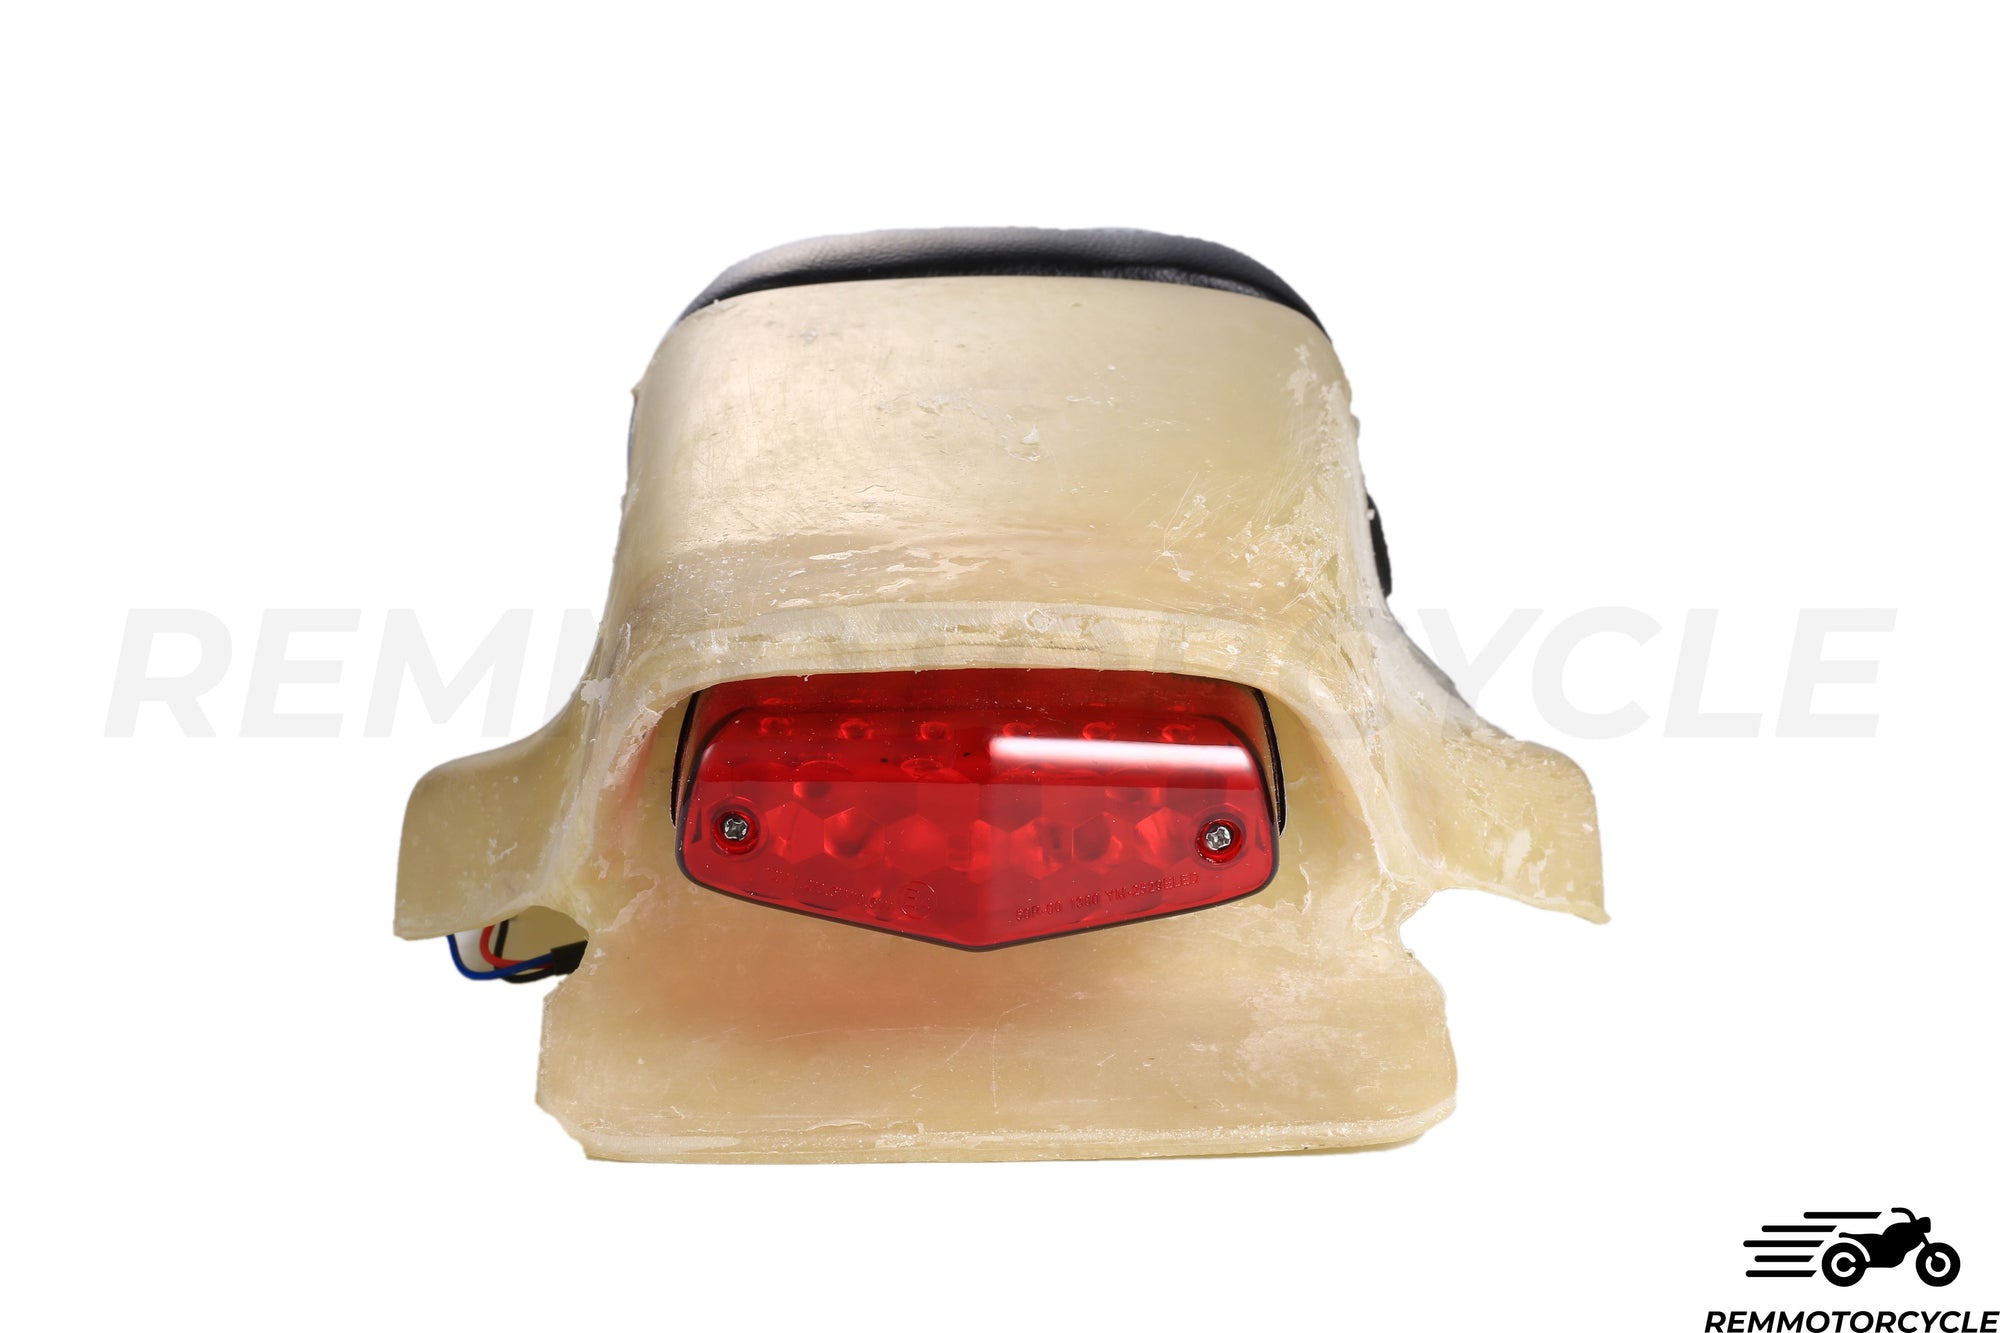 Hull + flat track black or brown saddle with rear light